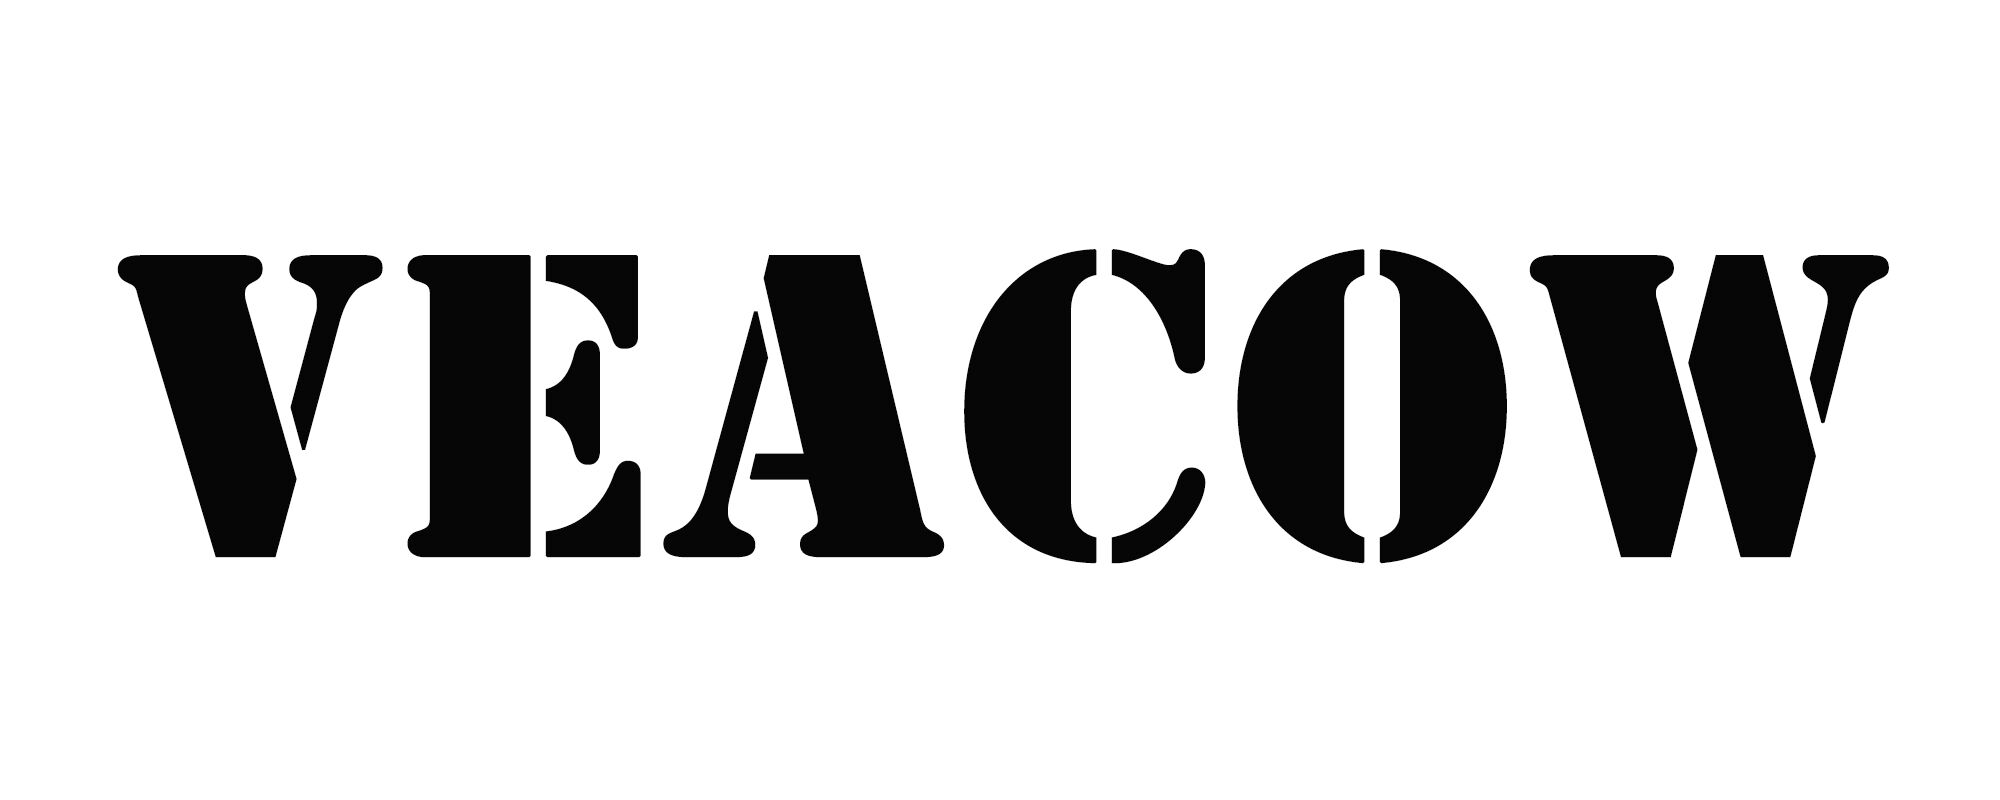 VEACOW